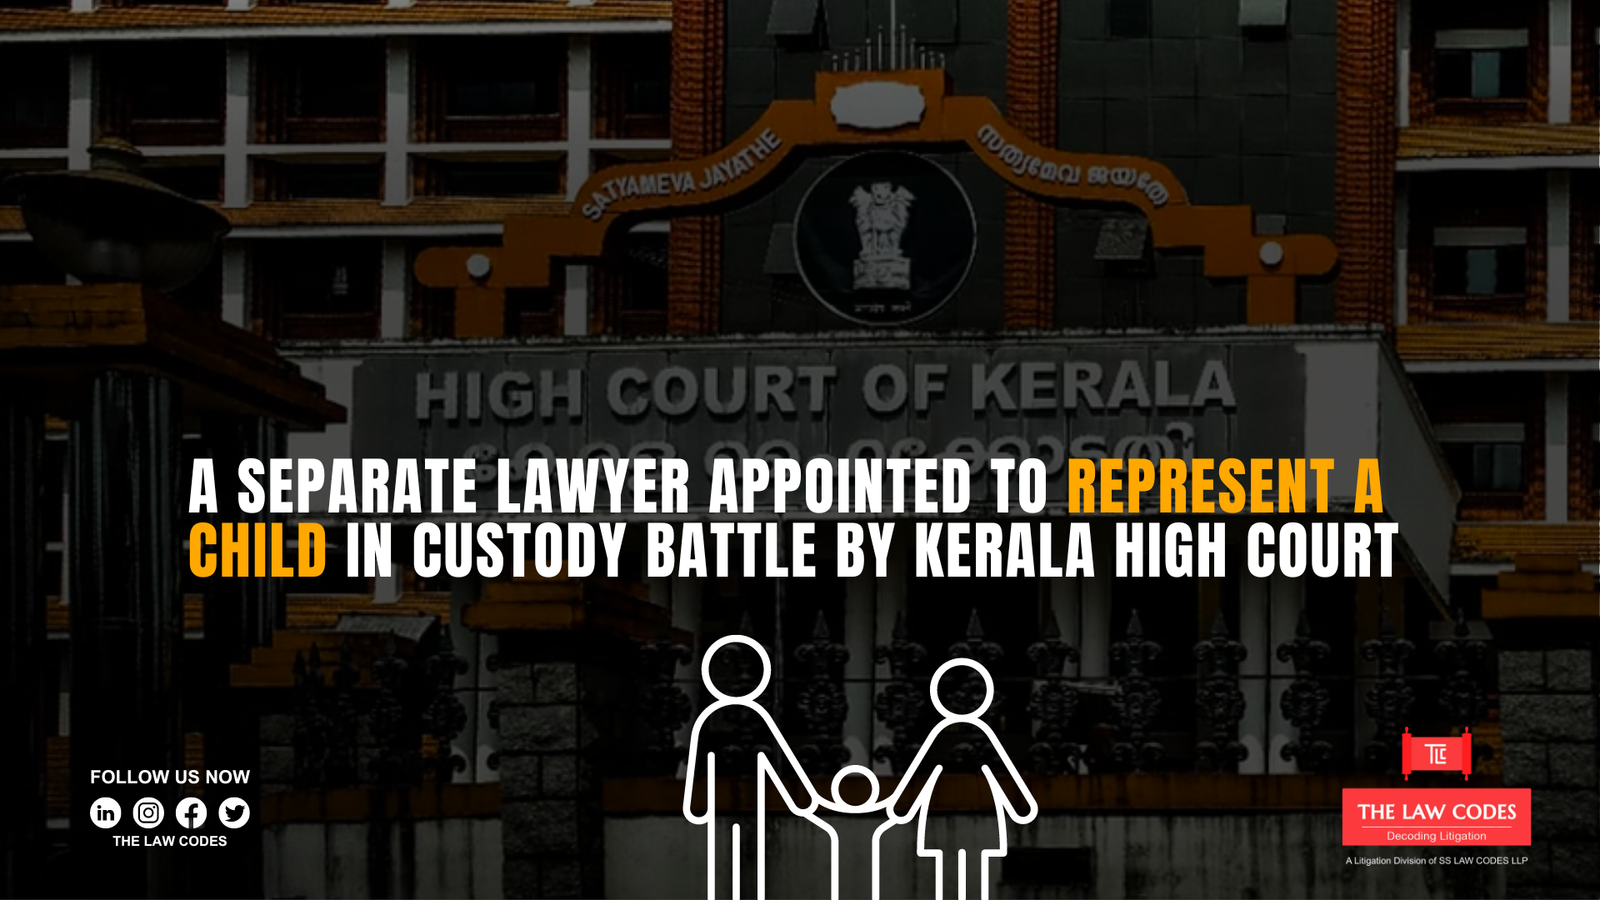 A separate lawyer appointed to represent a child in custody battle by Kerala High Court